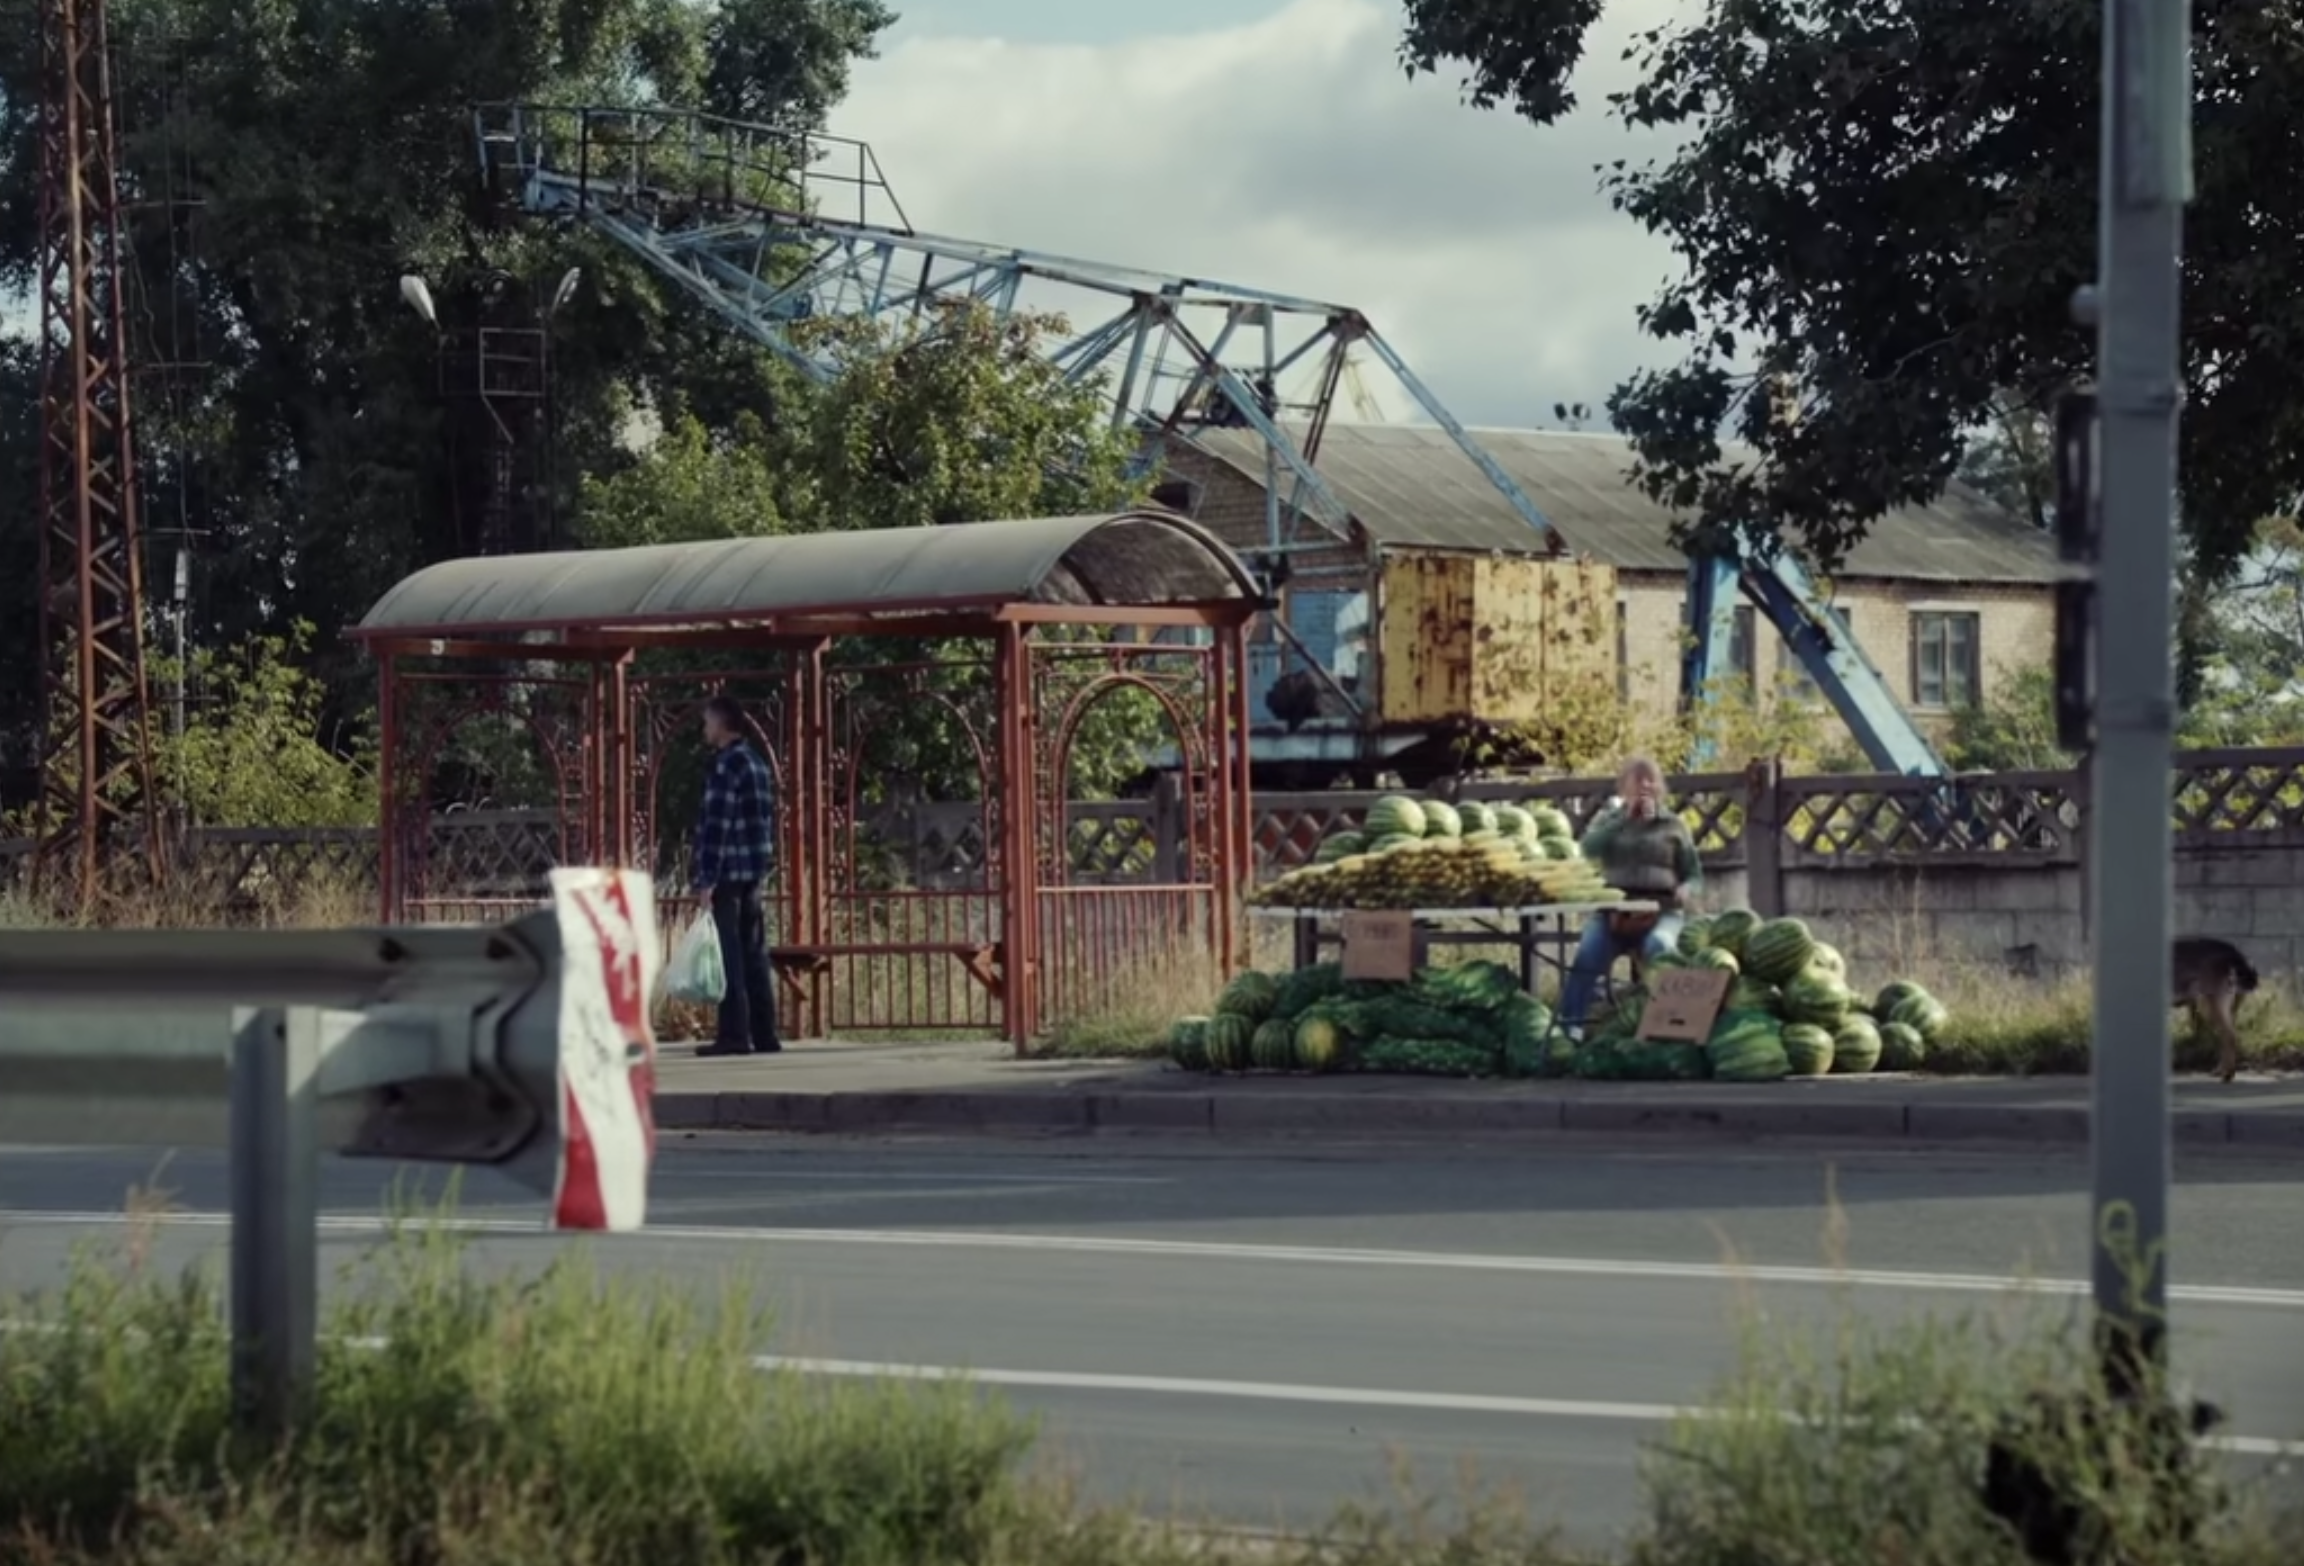 A bus station in Ukraine that featured in the music video released on Oct. 15 by Belgian-born singer Stromae.